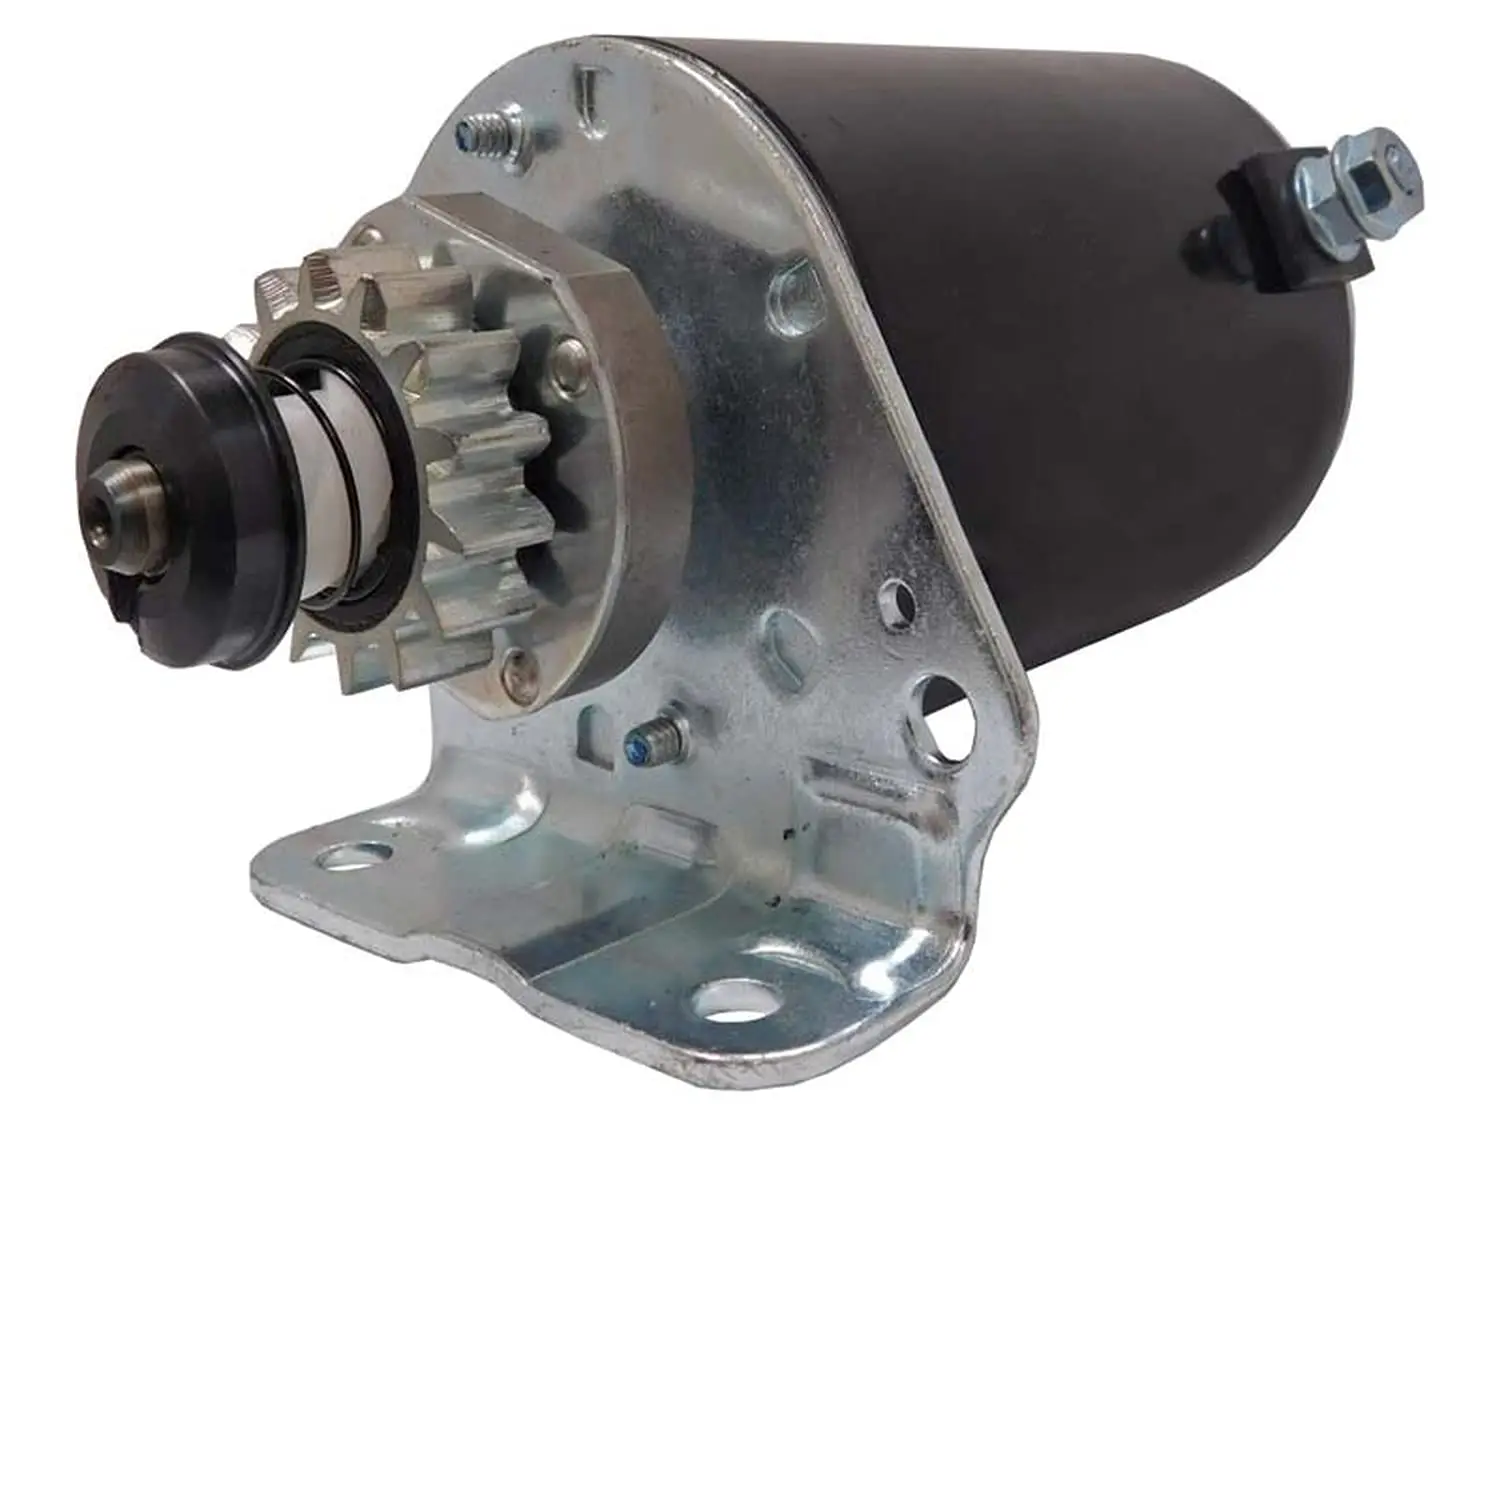 

Starter Fit For Briggs and Stratton Cub Cadet 14.5 16 16.5 17 17.5 18 18.5 HP For John Deere New Holland Toro 14 Tooth Gear